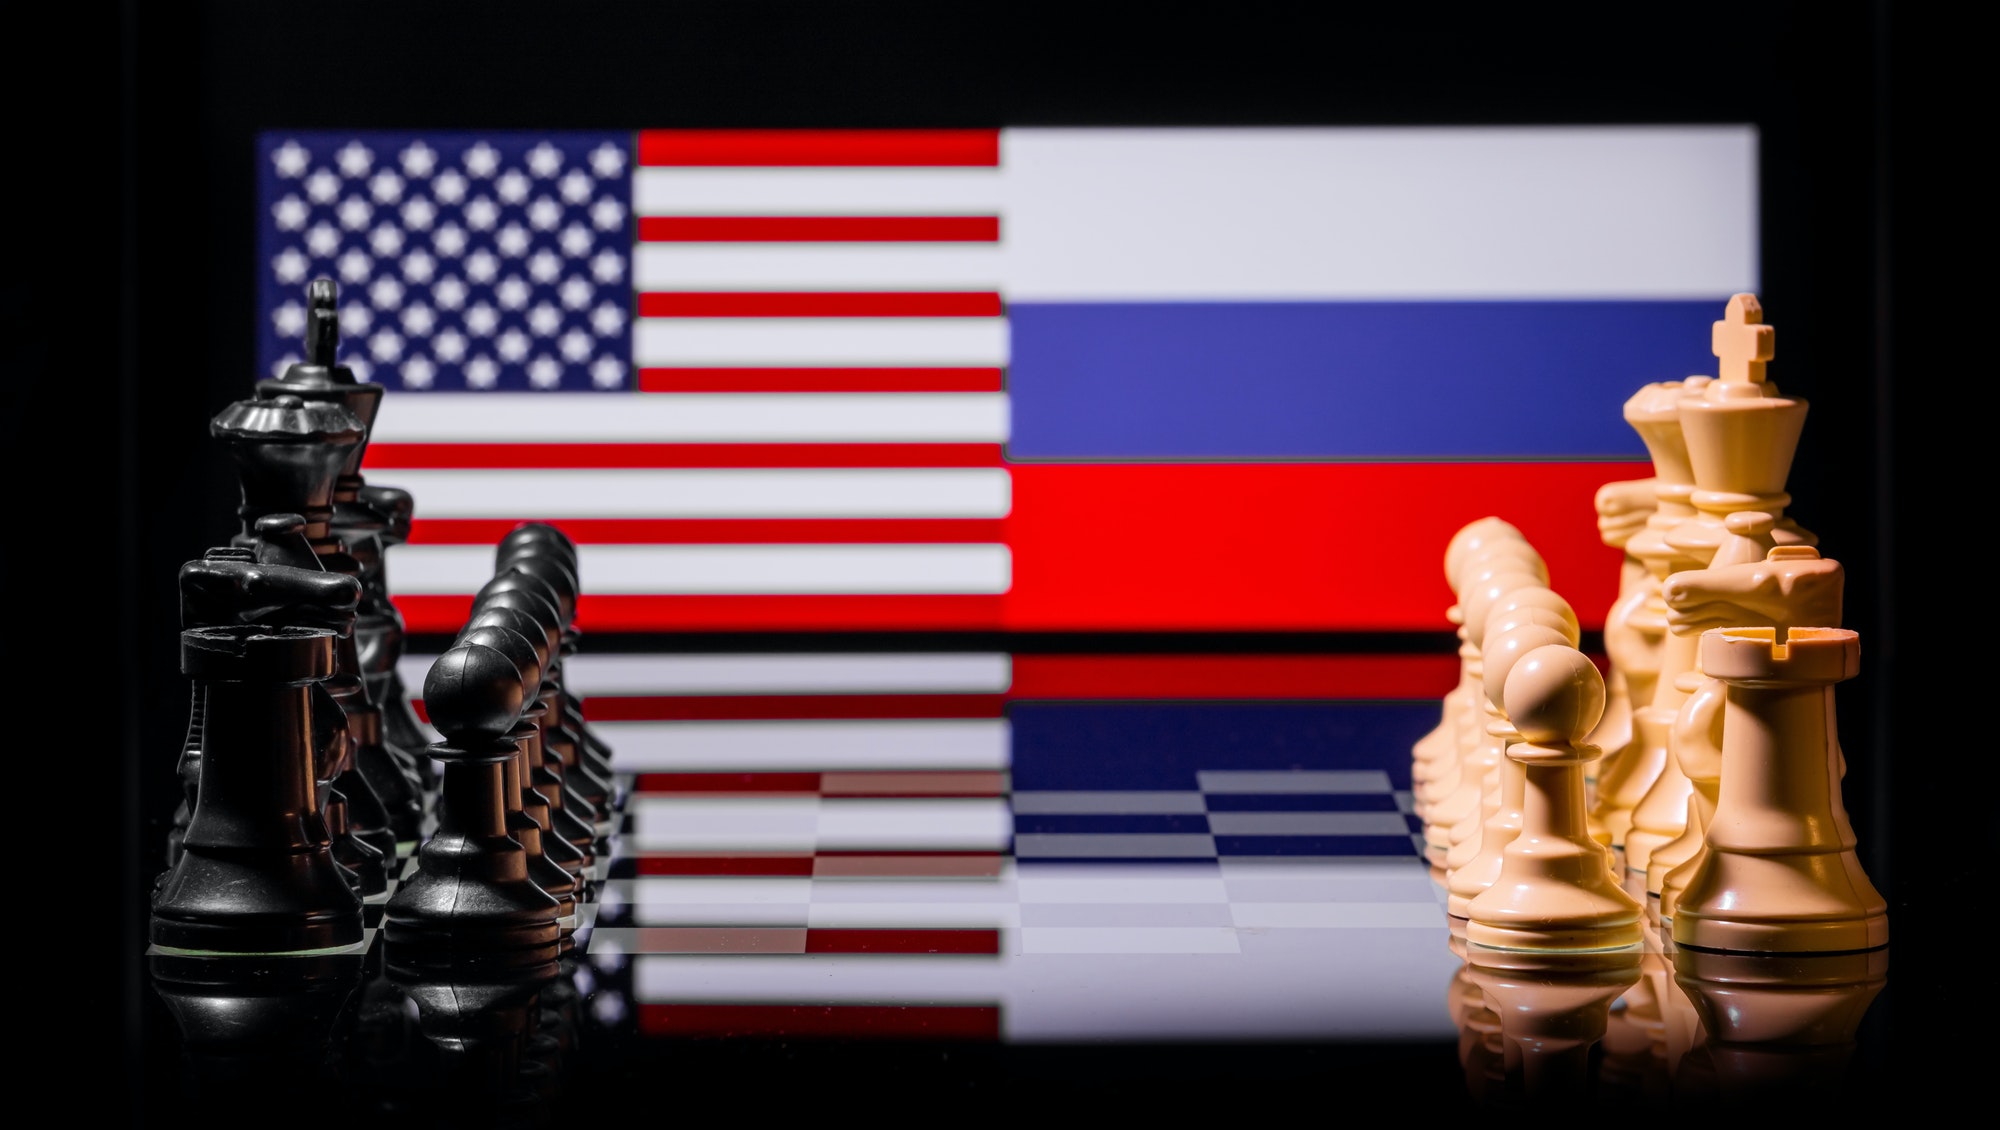 Conceptual image of war between United States and Russia using chess pieces and national flags